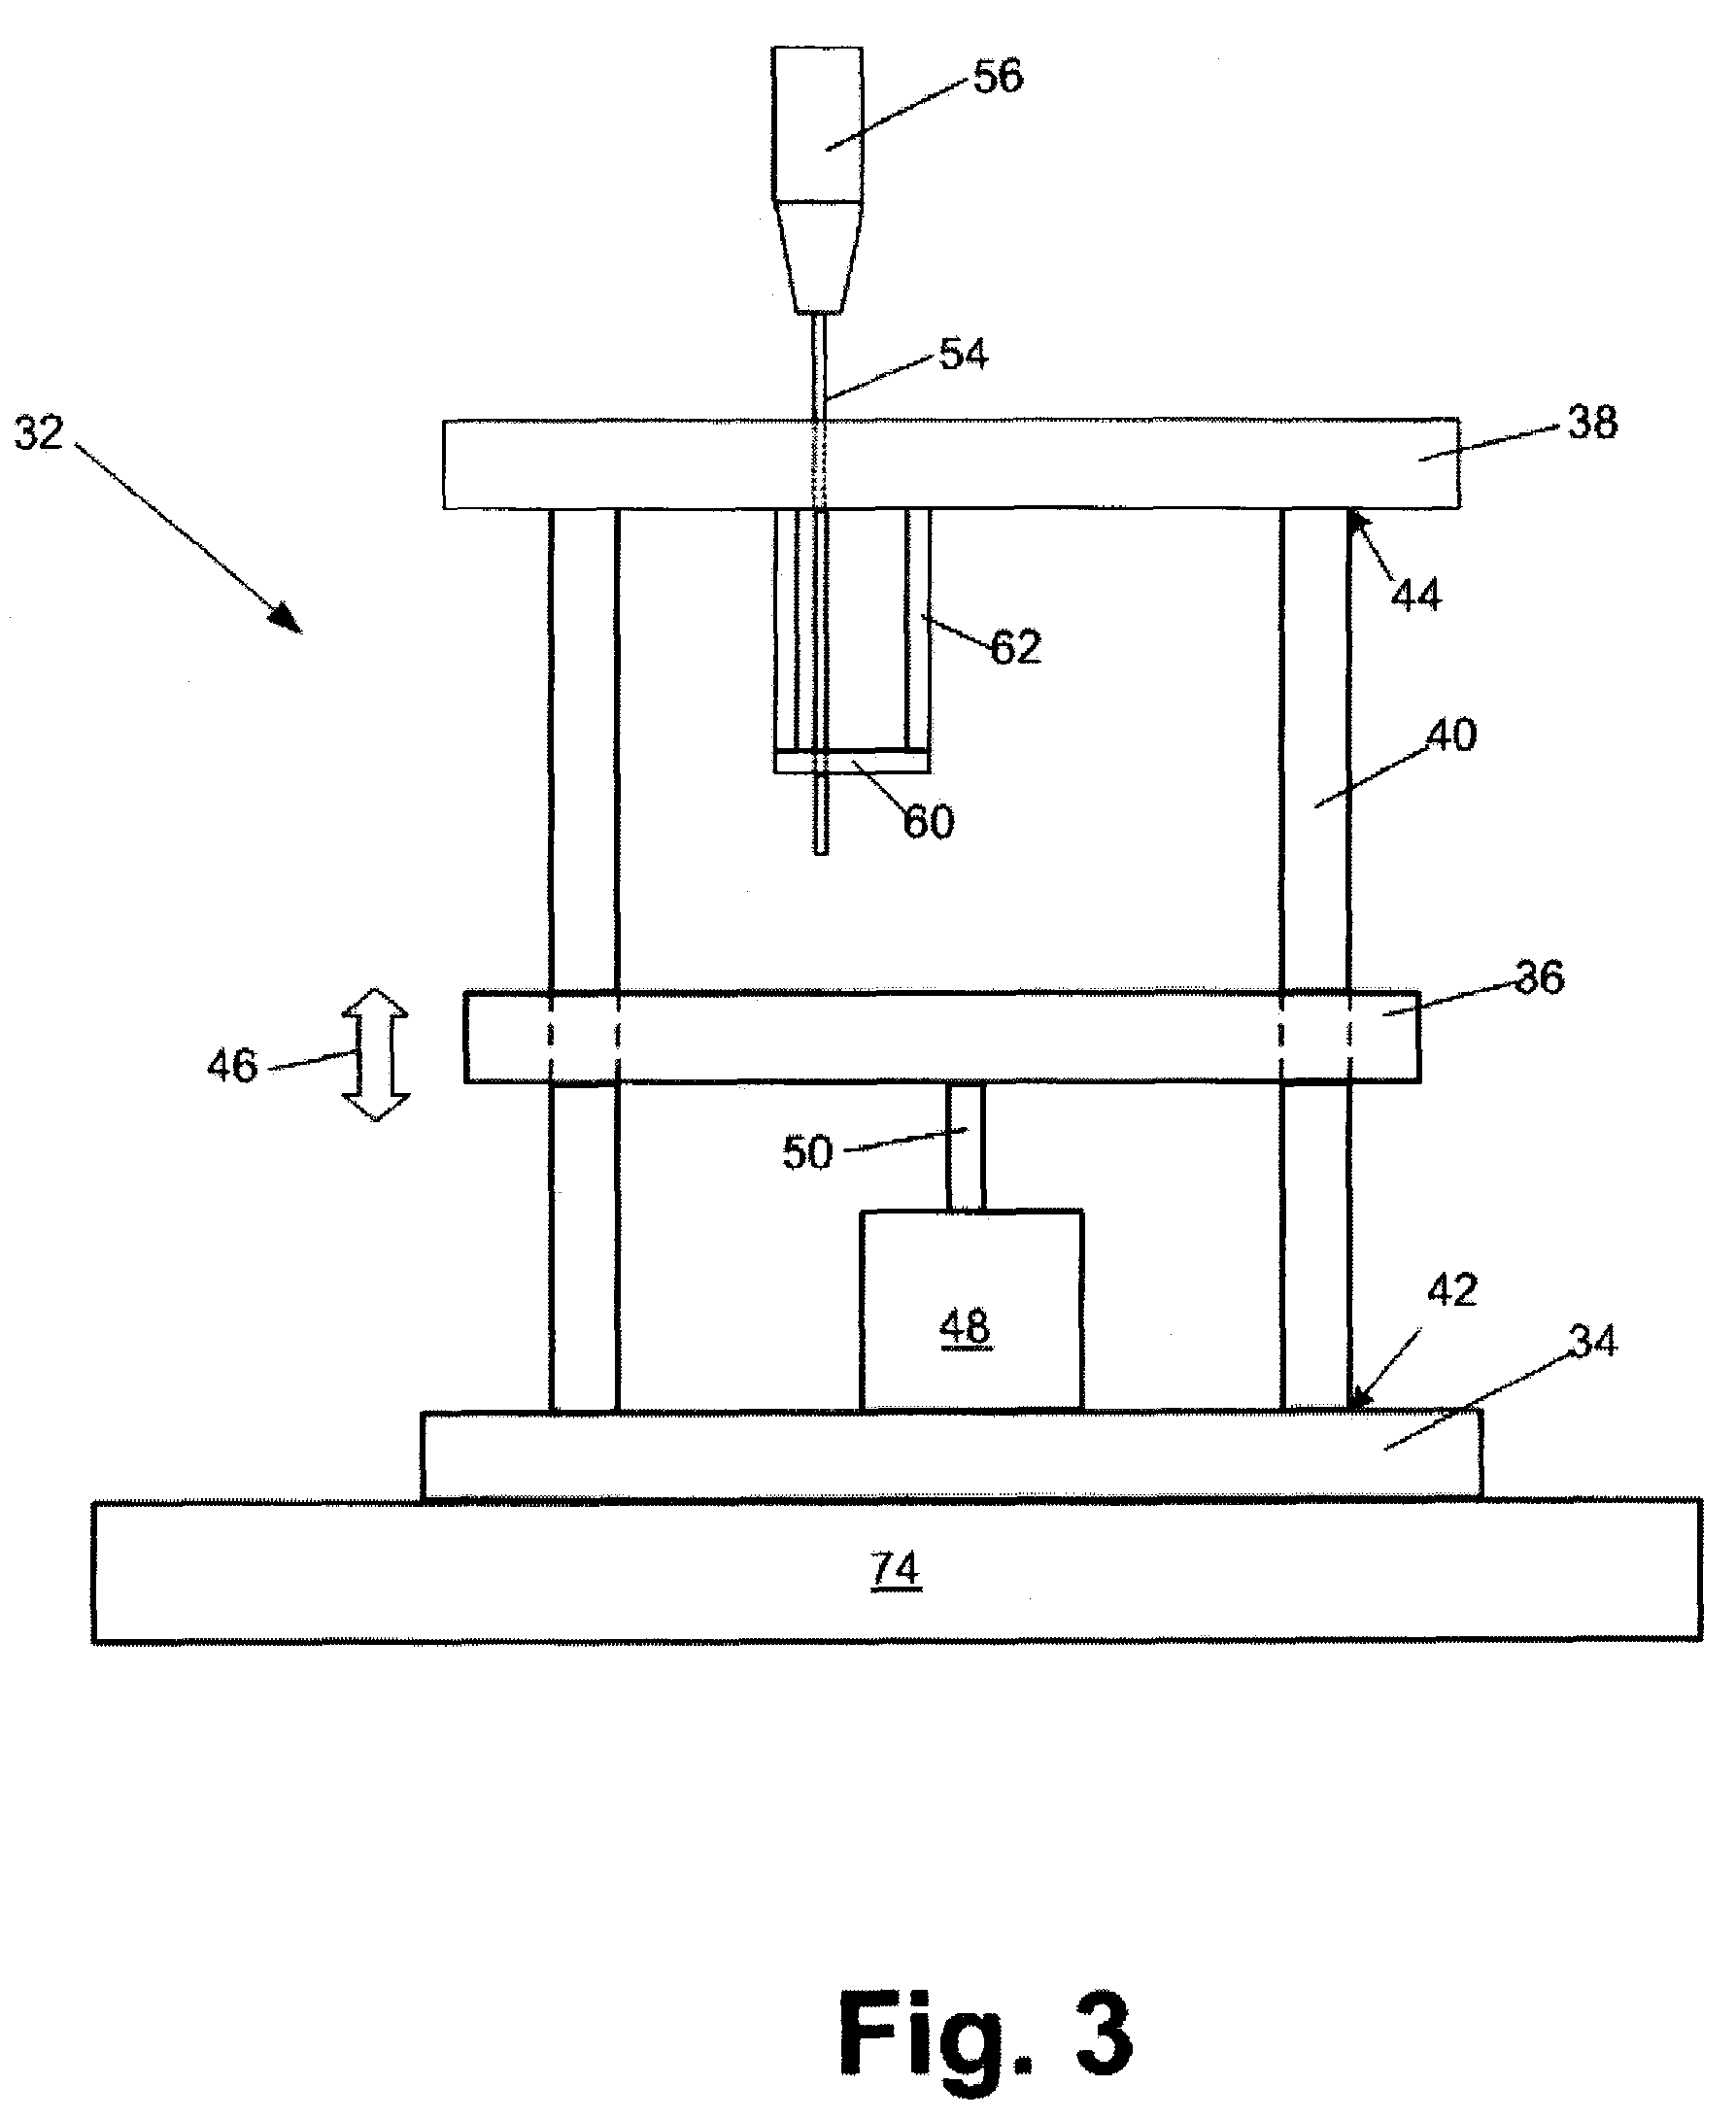 Method and apparatus for attaching an ink jet filter to an ink cartridge